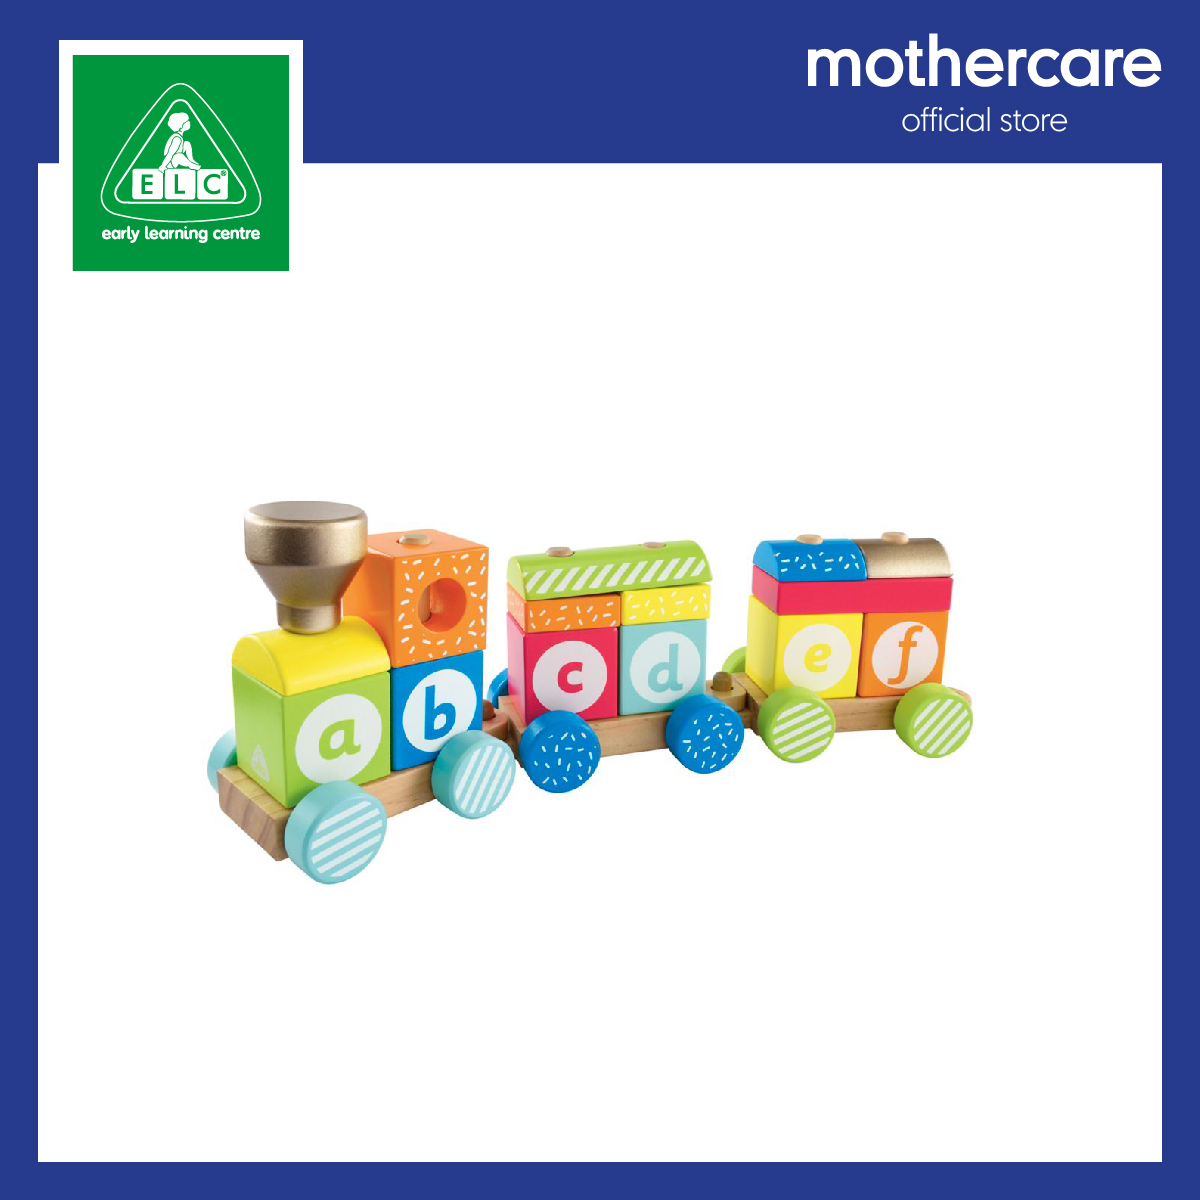 elc wooden stacking train